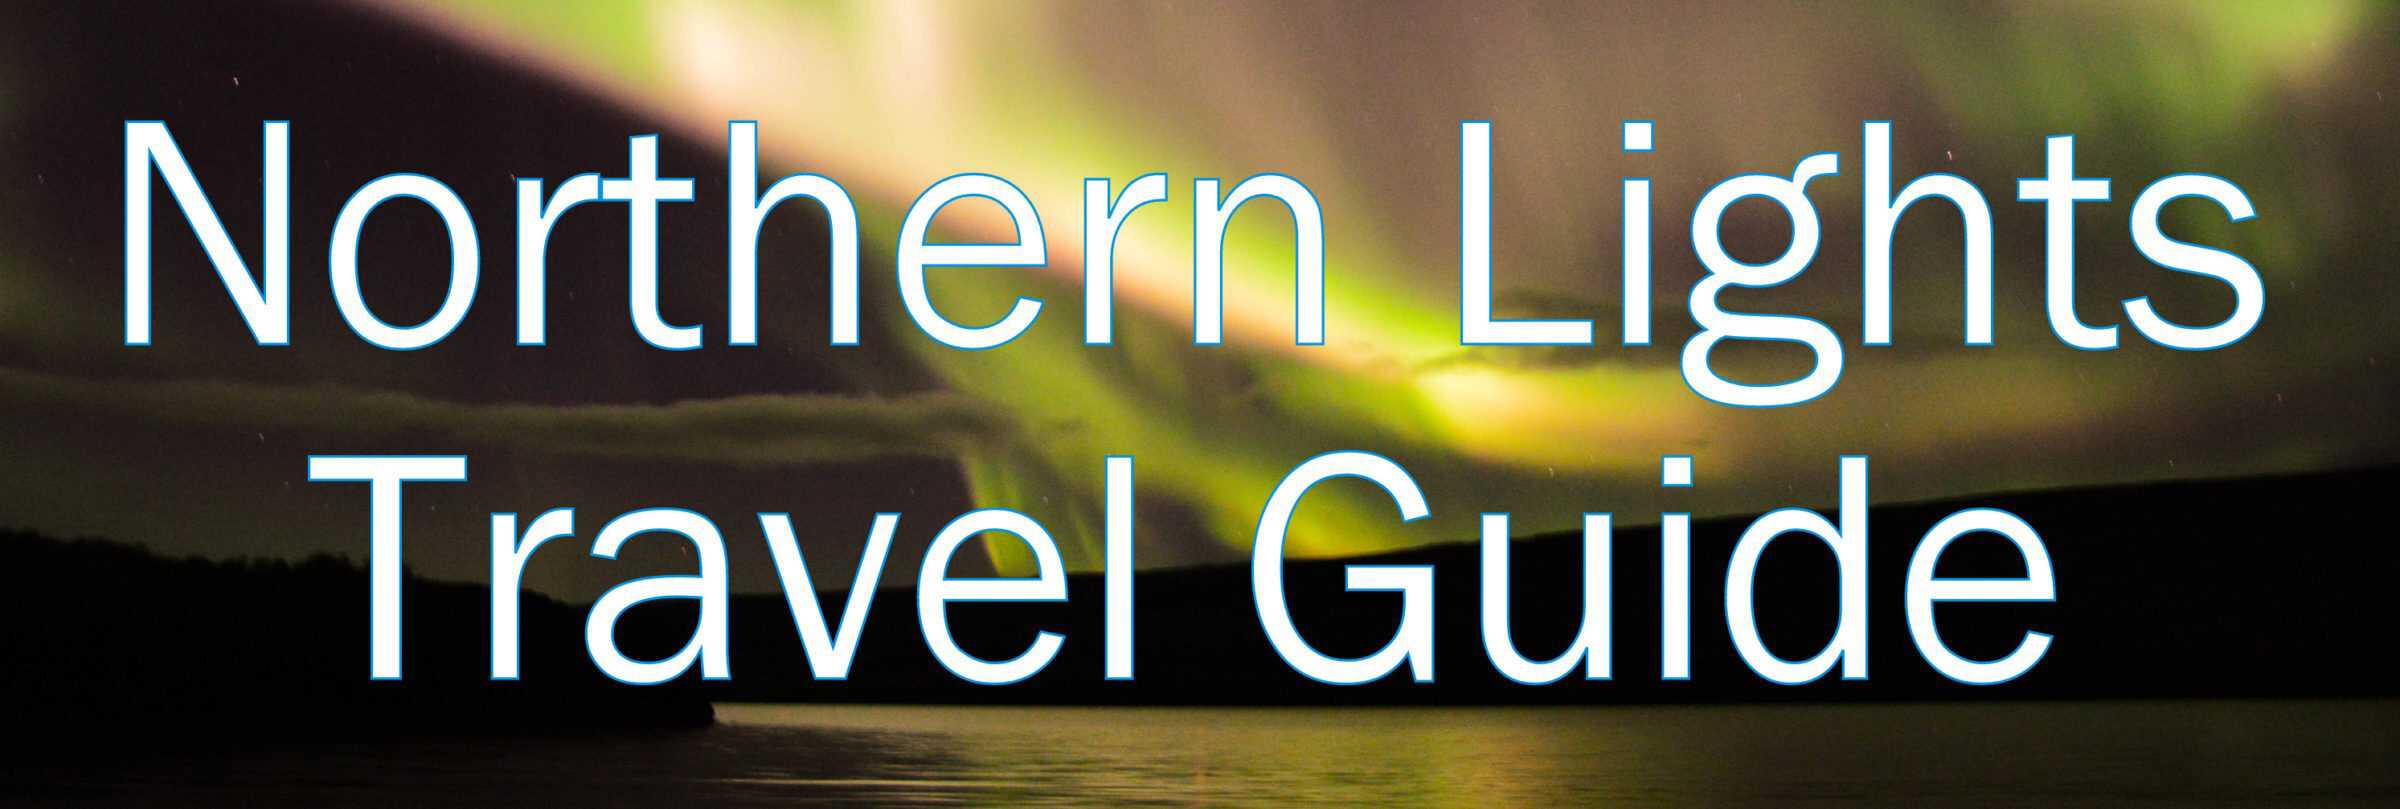 Northern Lights Travel Guide